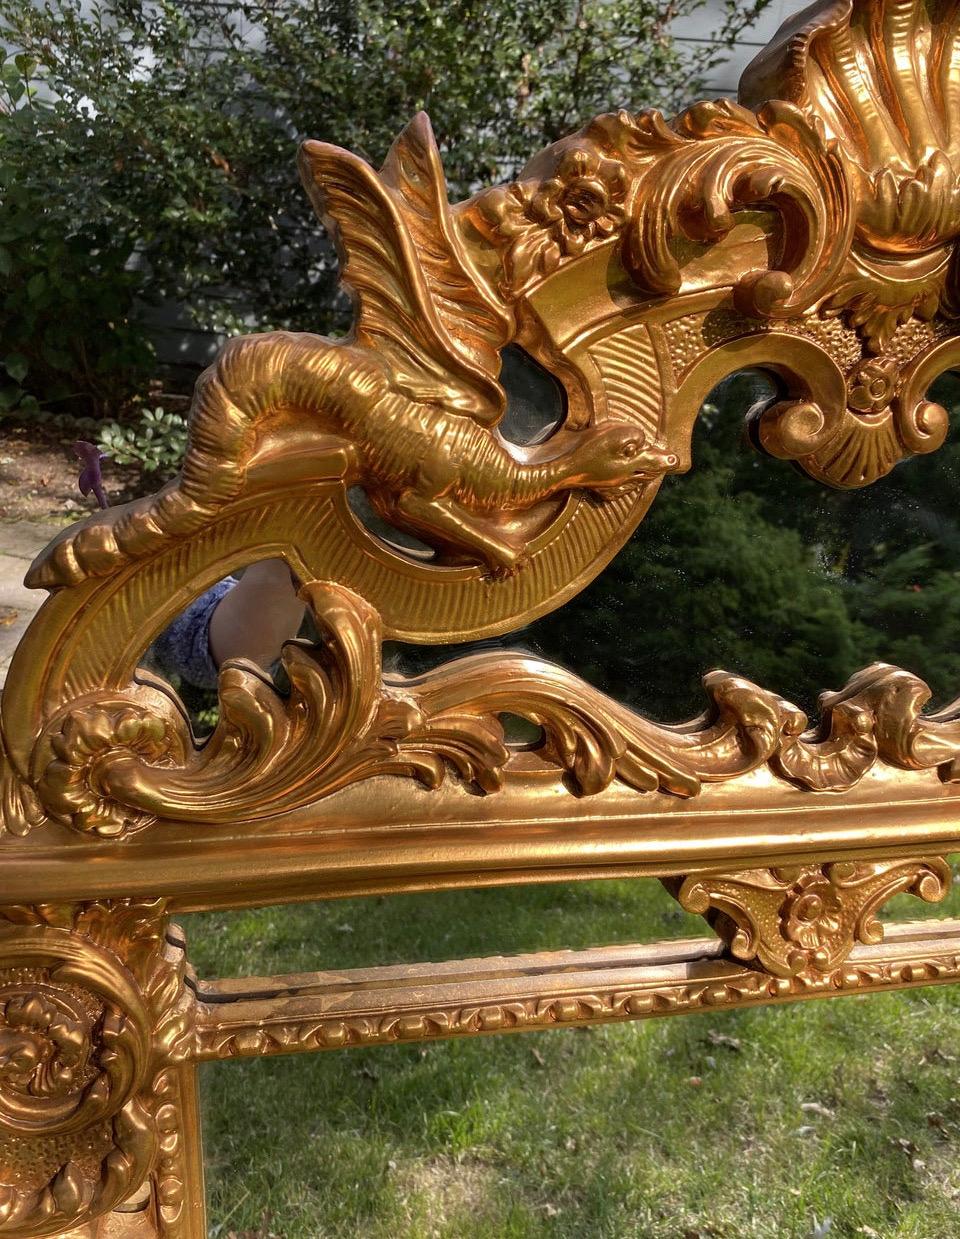 Vintage rare Italian Regency-Style Reproduction Gold Mirror (1960-80s) featuring ornate embellishments and two imposing dragons in flight. Painted and made of heavy composite.
Style is a fusion of European and Asian influences
Material is a wood